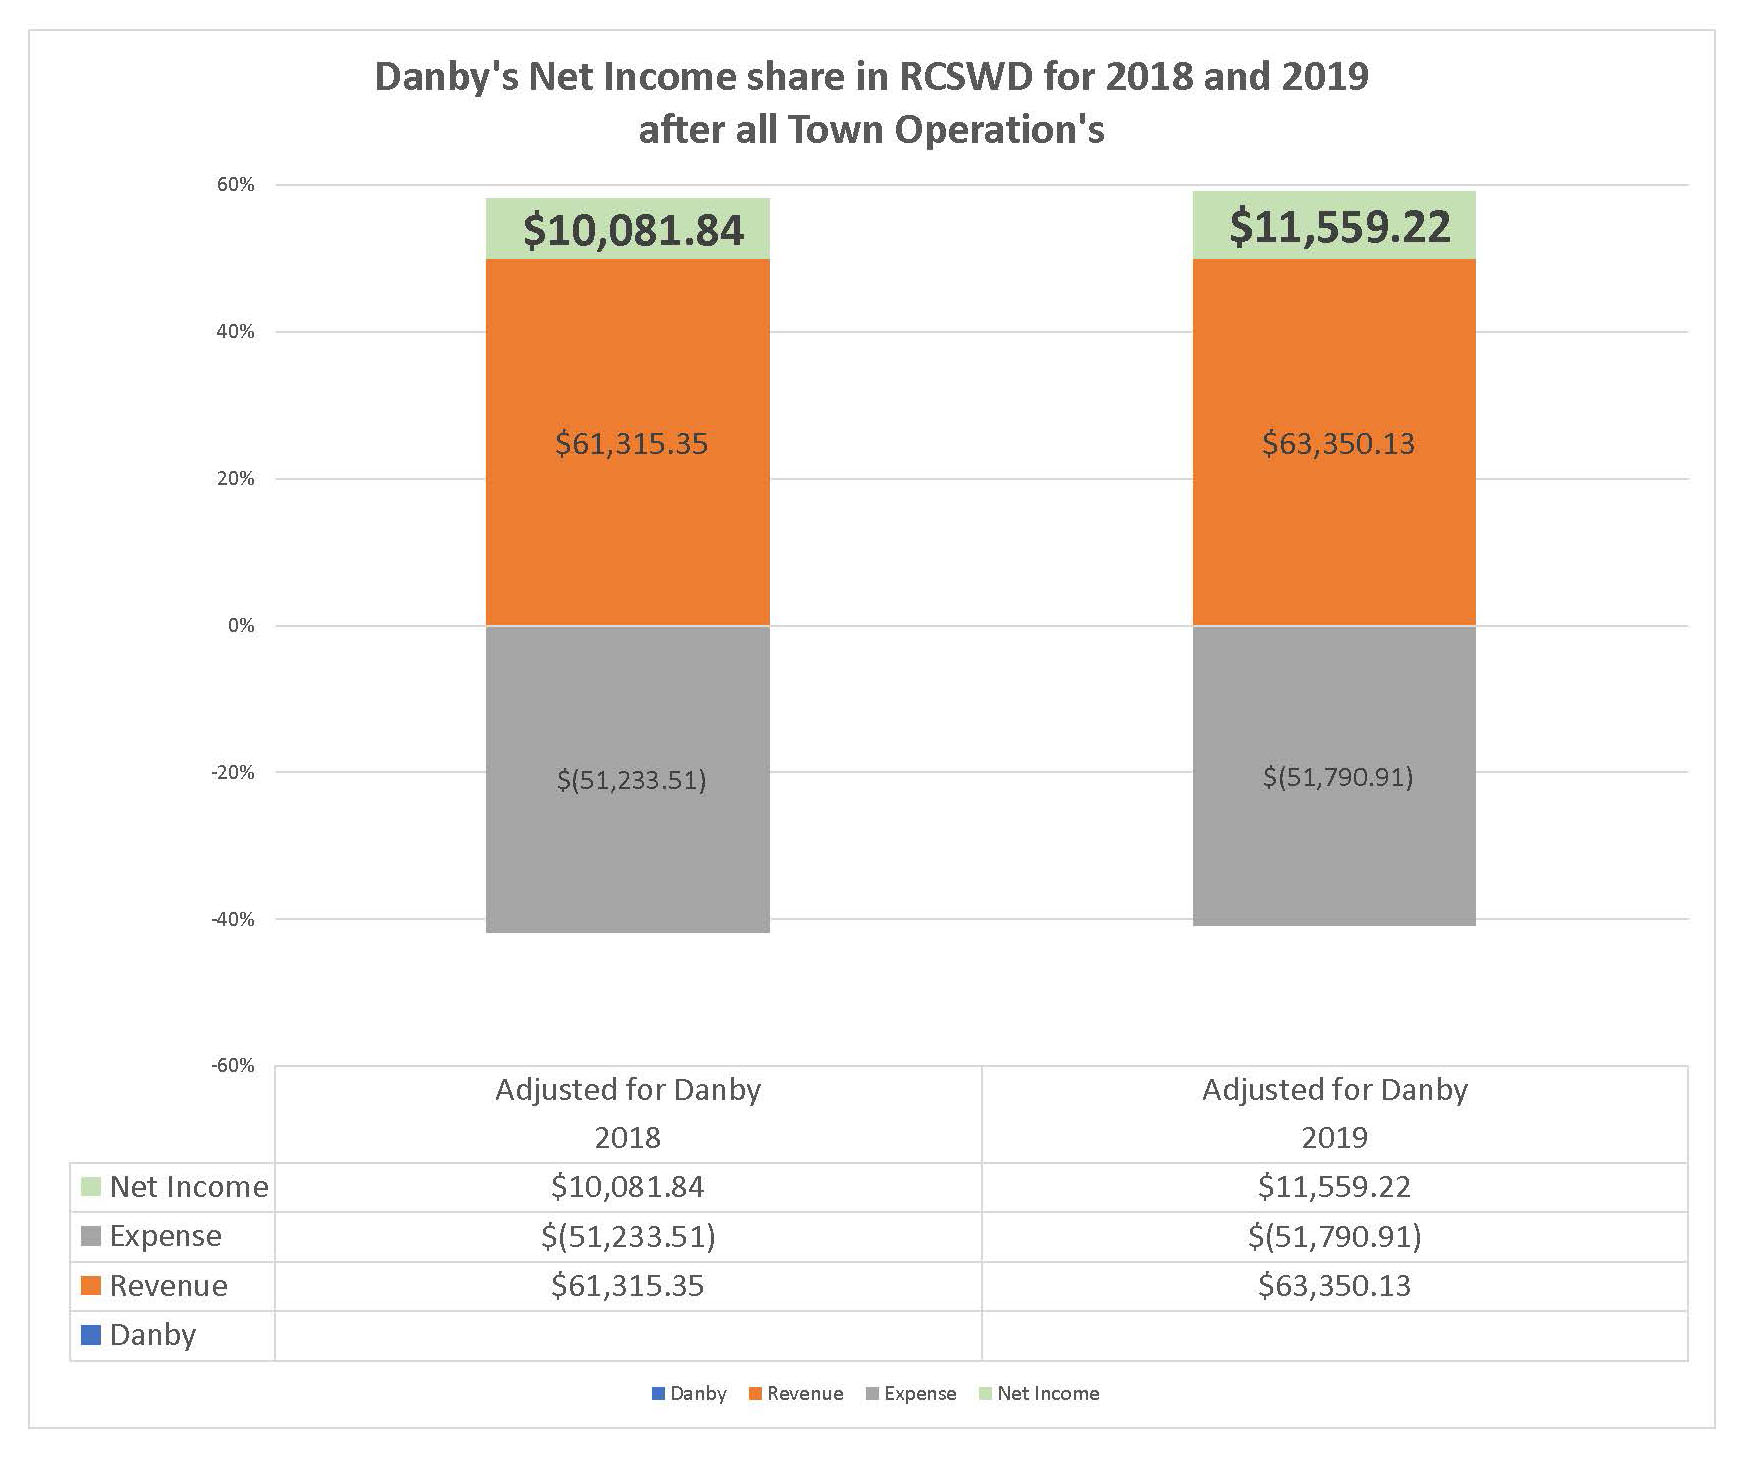 Danby's proportional share in RCSWD net income